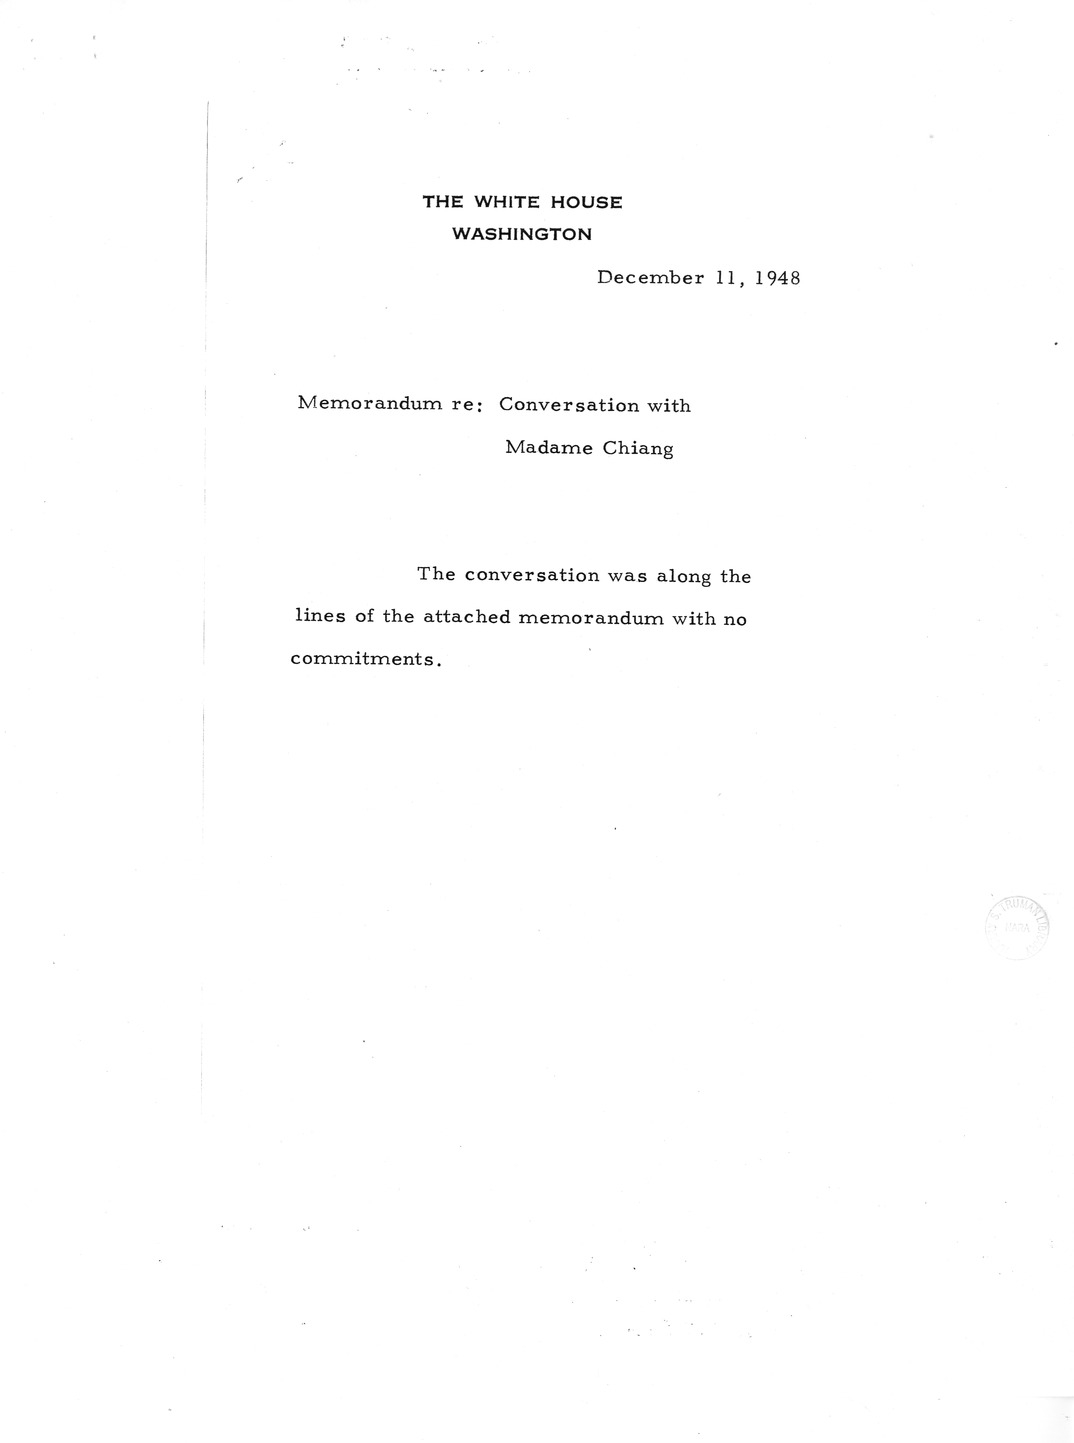 Memorandum from R. H. Hillenkoetter, with Attachments and Related Material [Sanitized Copy]